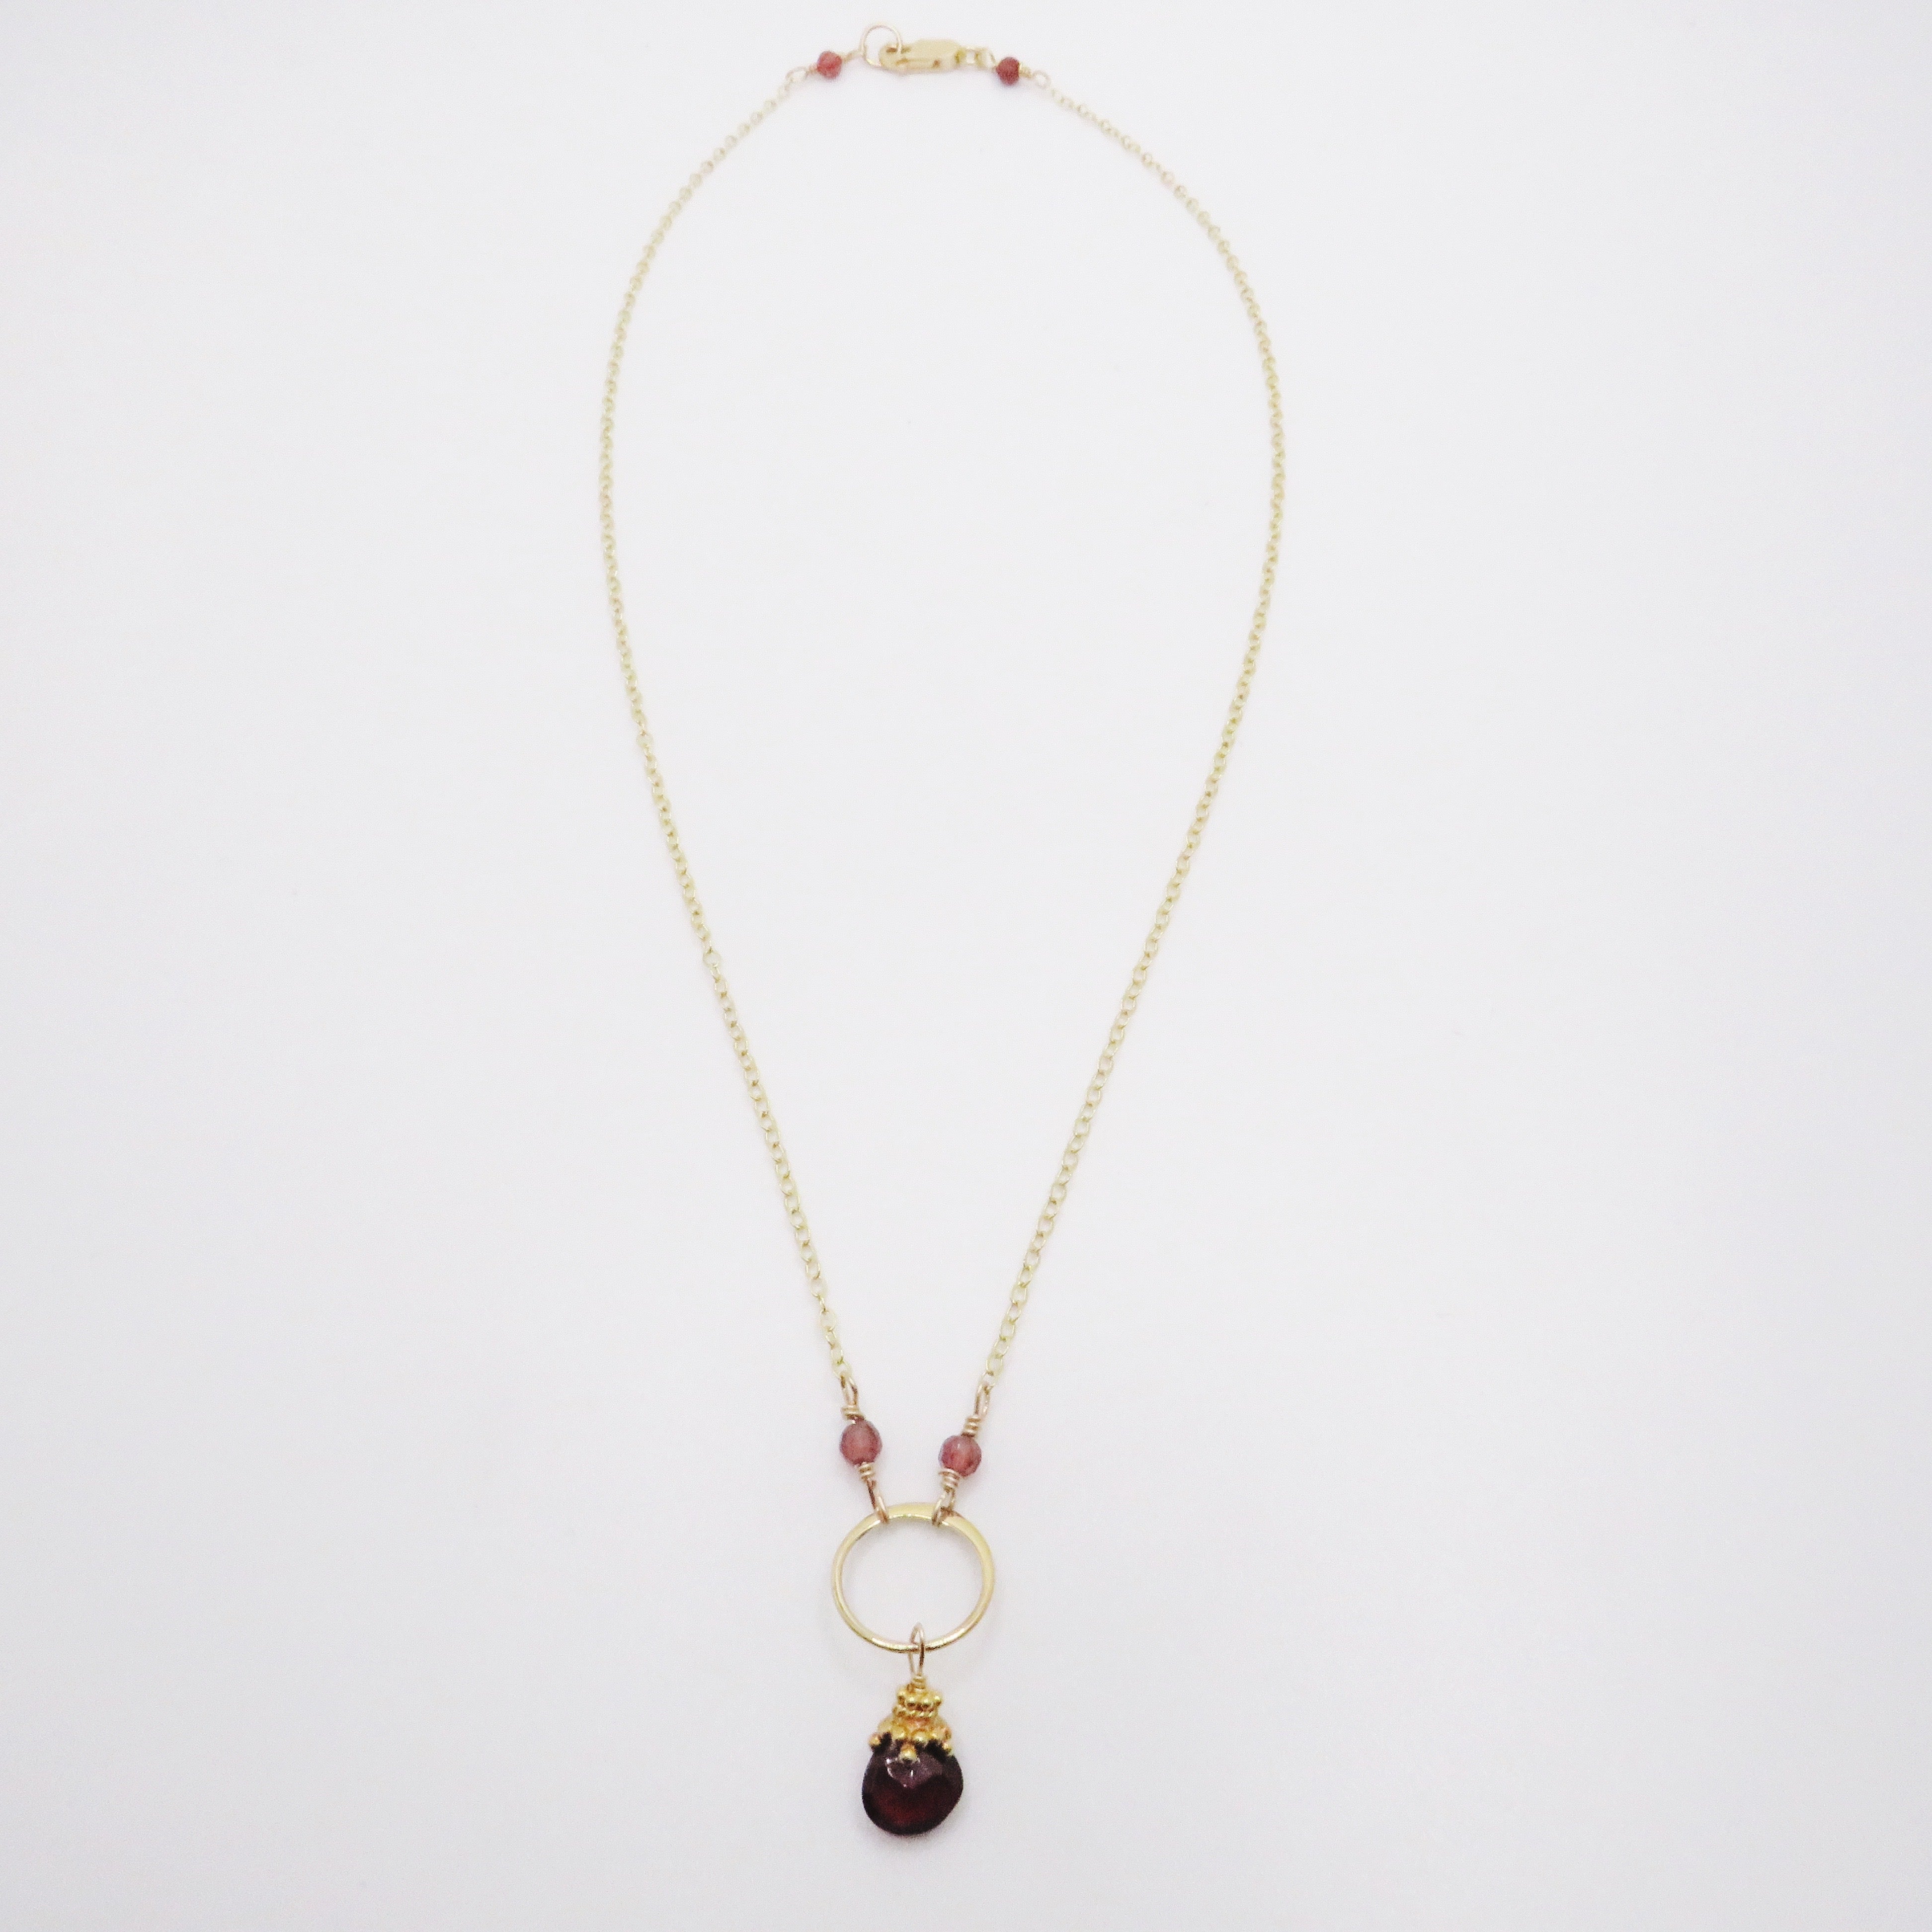 Garnet and Gold Fill Necklace